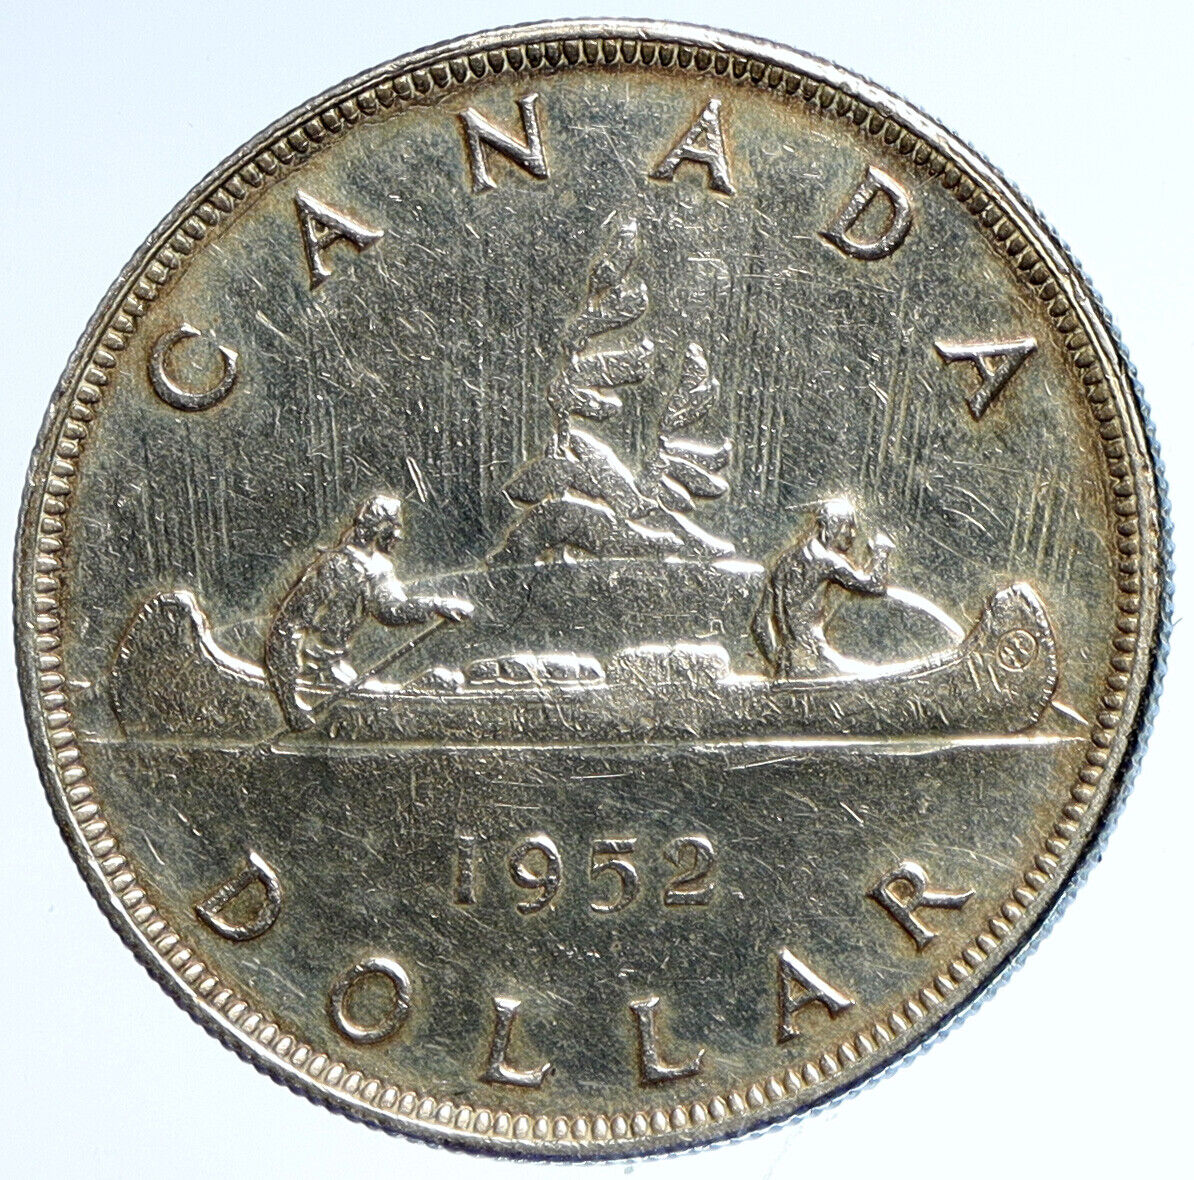 1952 CANADA UK KING GEORGE VI Canoe VOYAGERS Crew OLD SILVER Dollar Coin i113396